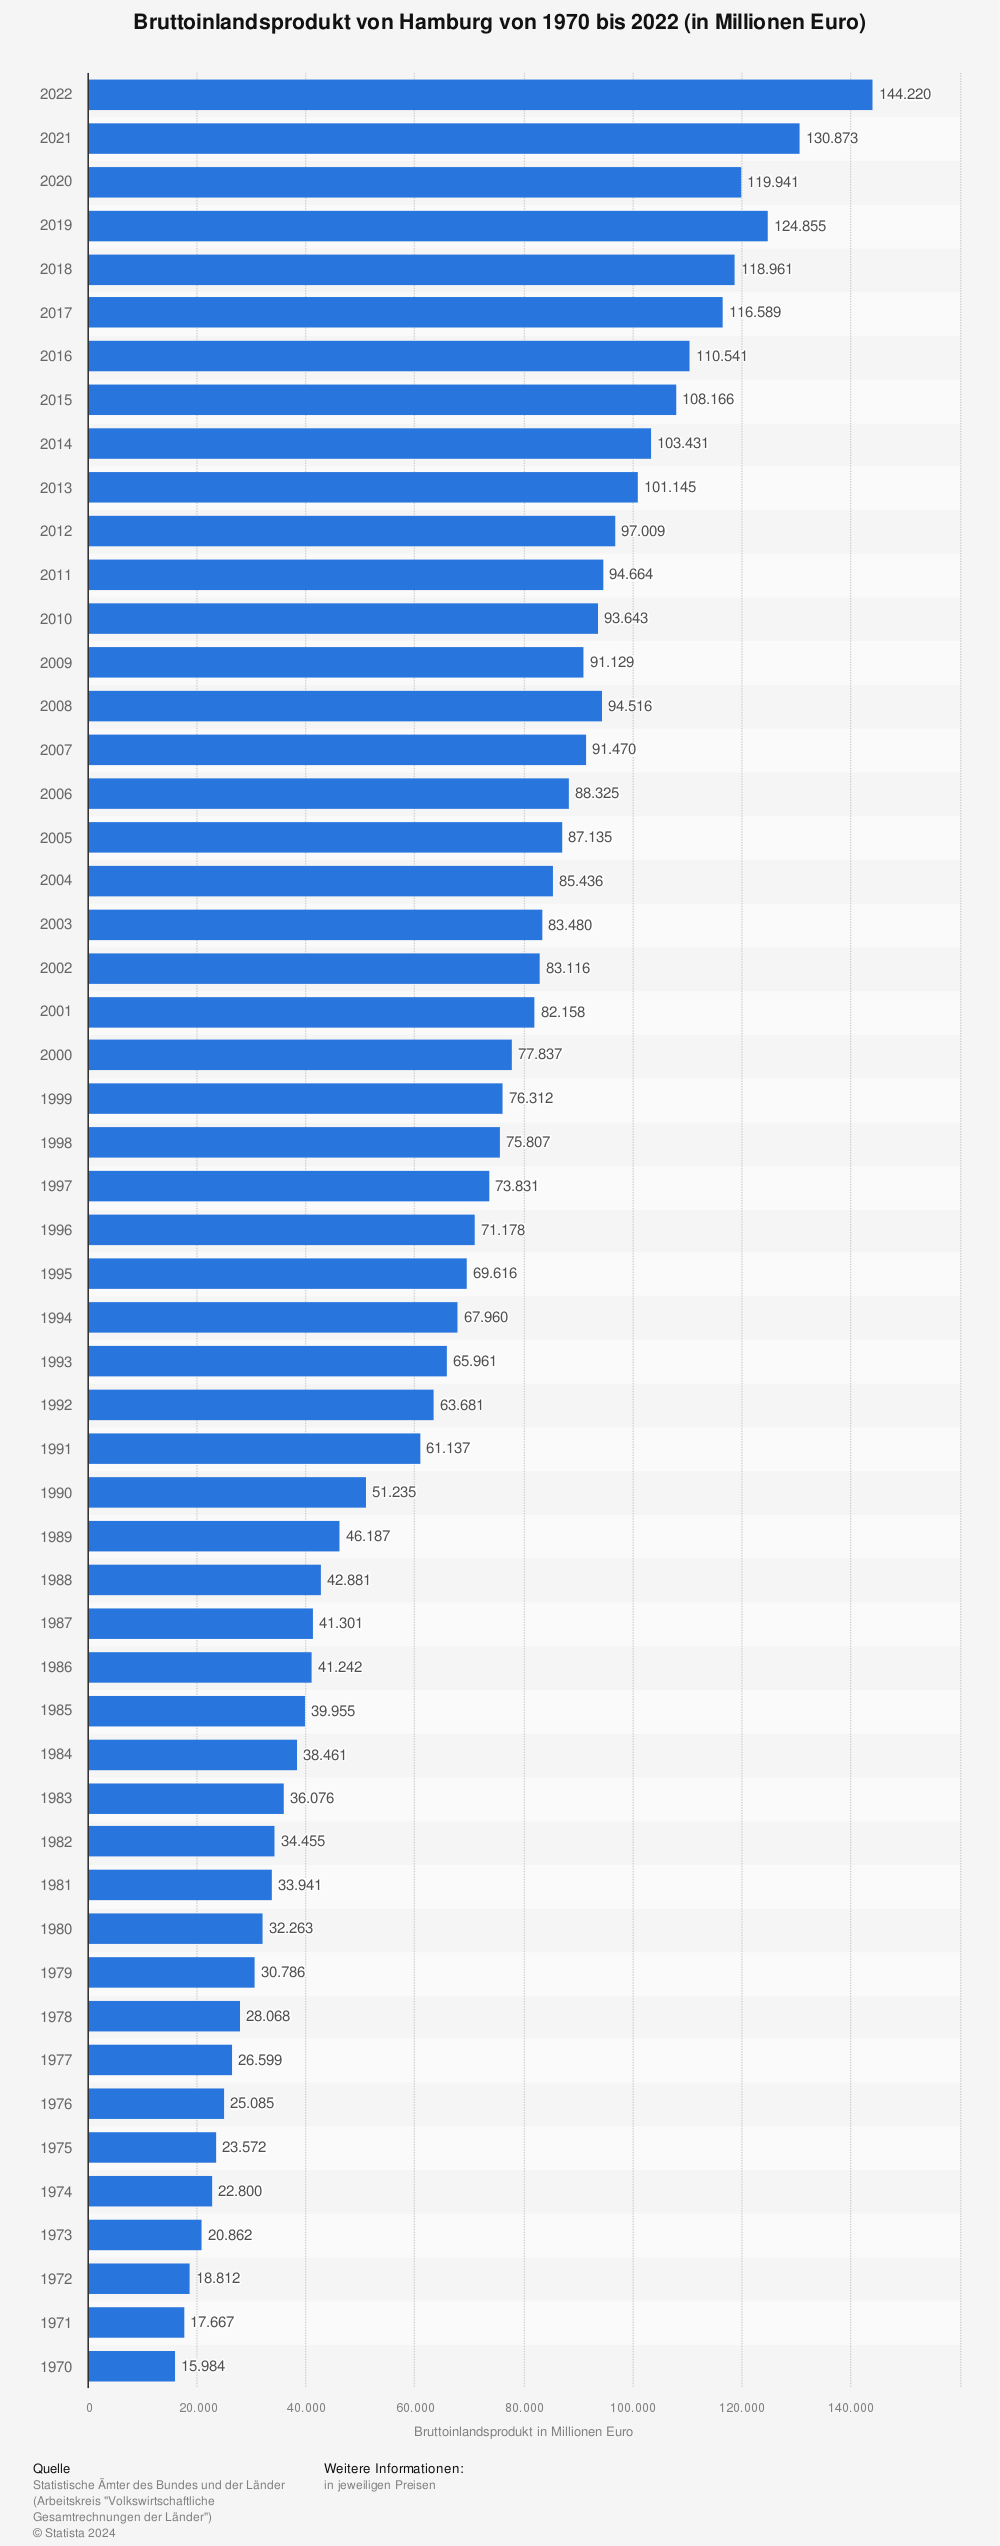 Statistics: Gross domestic product of Hamburg from 1970 to 2018 (in millions of Euros) | Statista